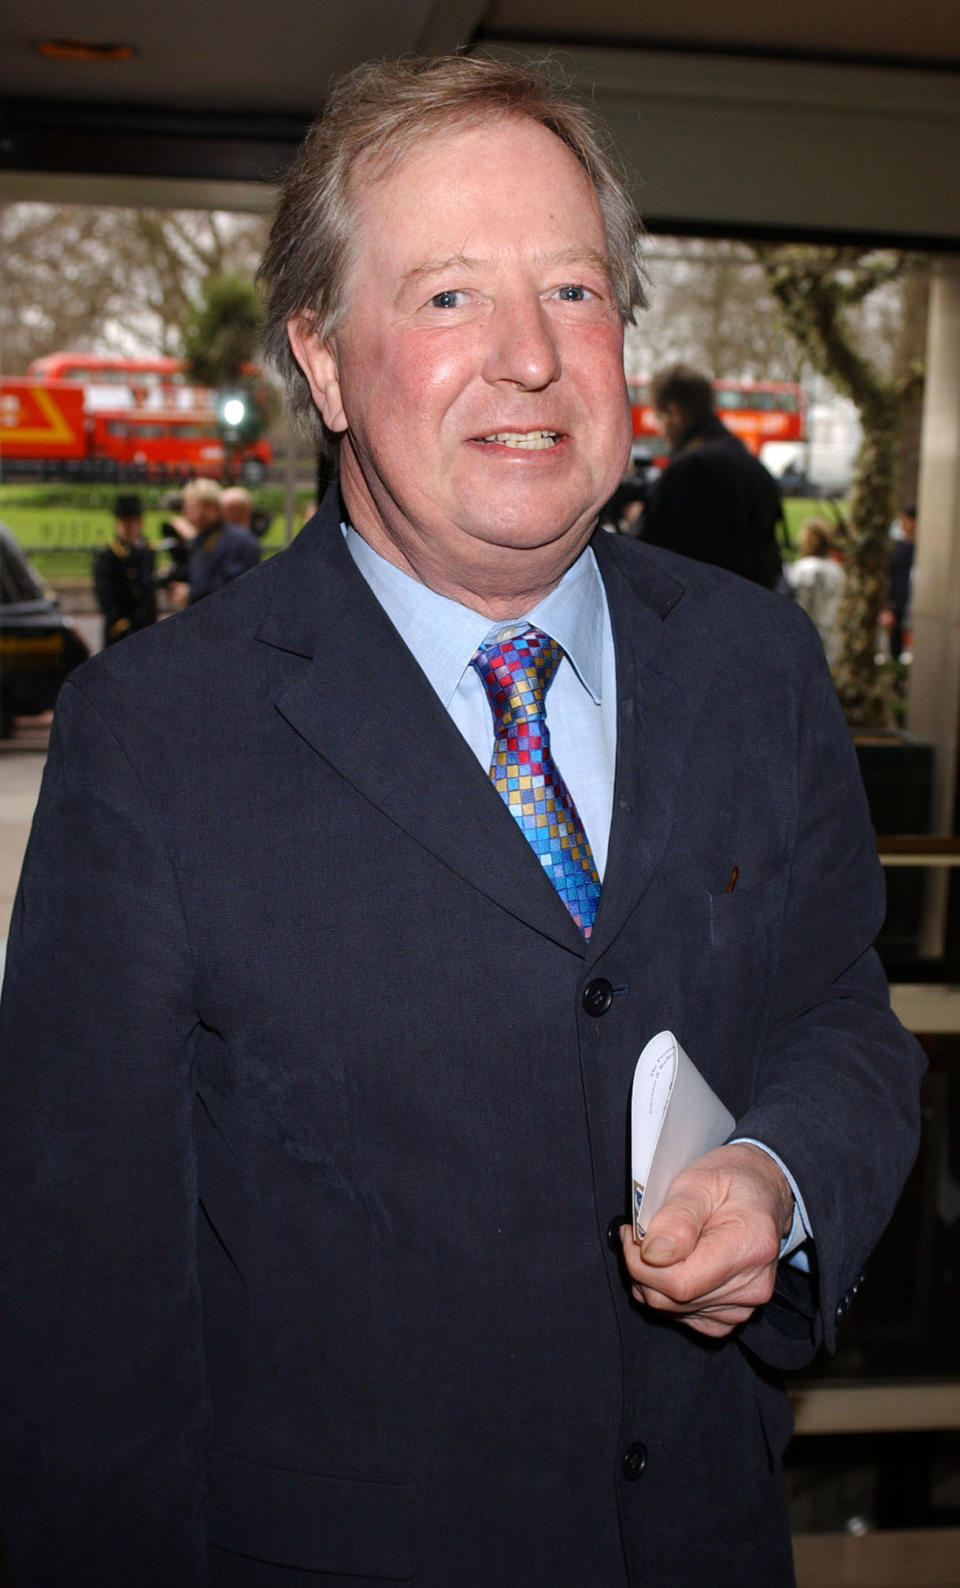 File photo dated 11/03/2003 of Tim Brooke-Taylor, arriving at the 2003 Television & Radio Industries Club (TRIC) Awards at the Grovesnor House Hotel, central London, the comedian and actor has died after contracting coronavirus, his agent said.